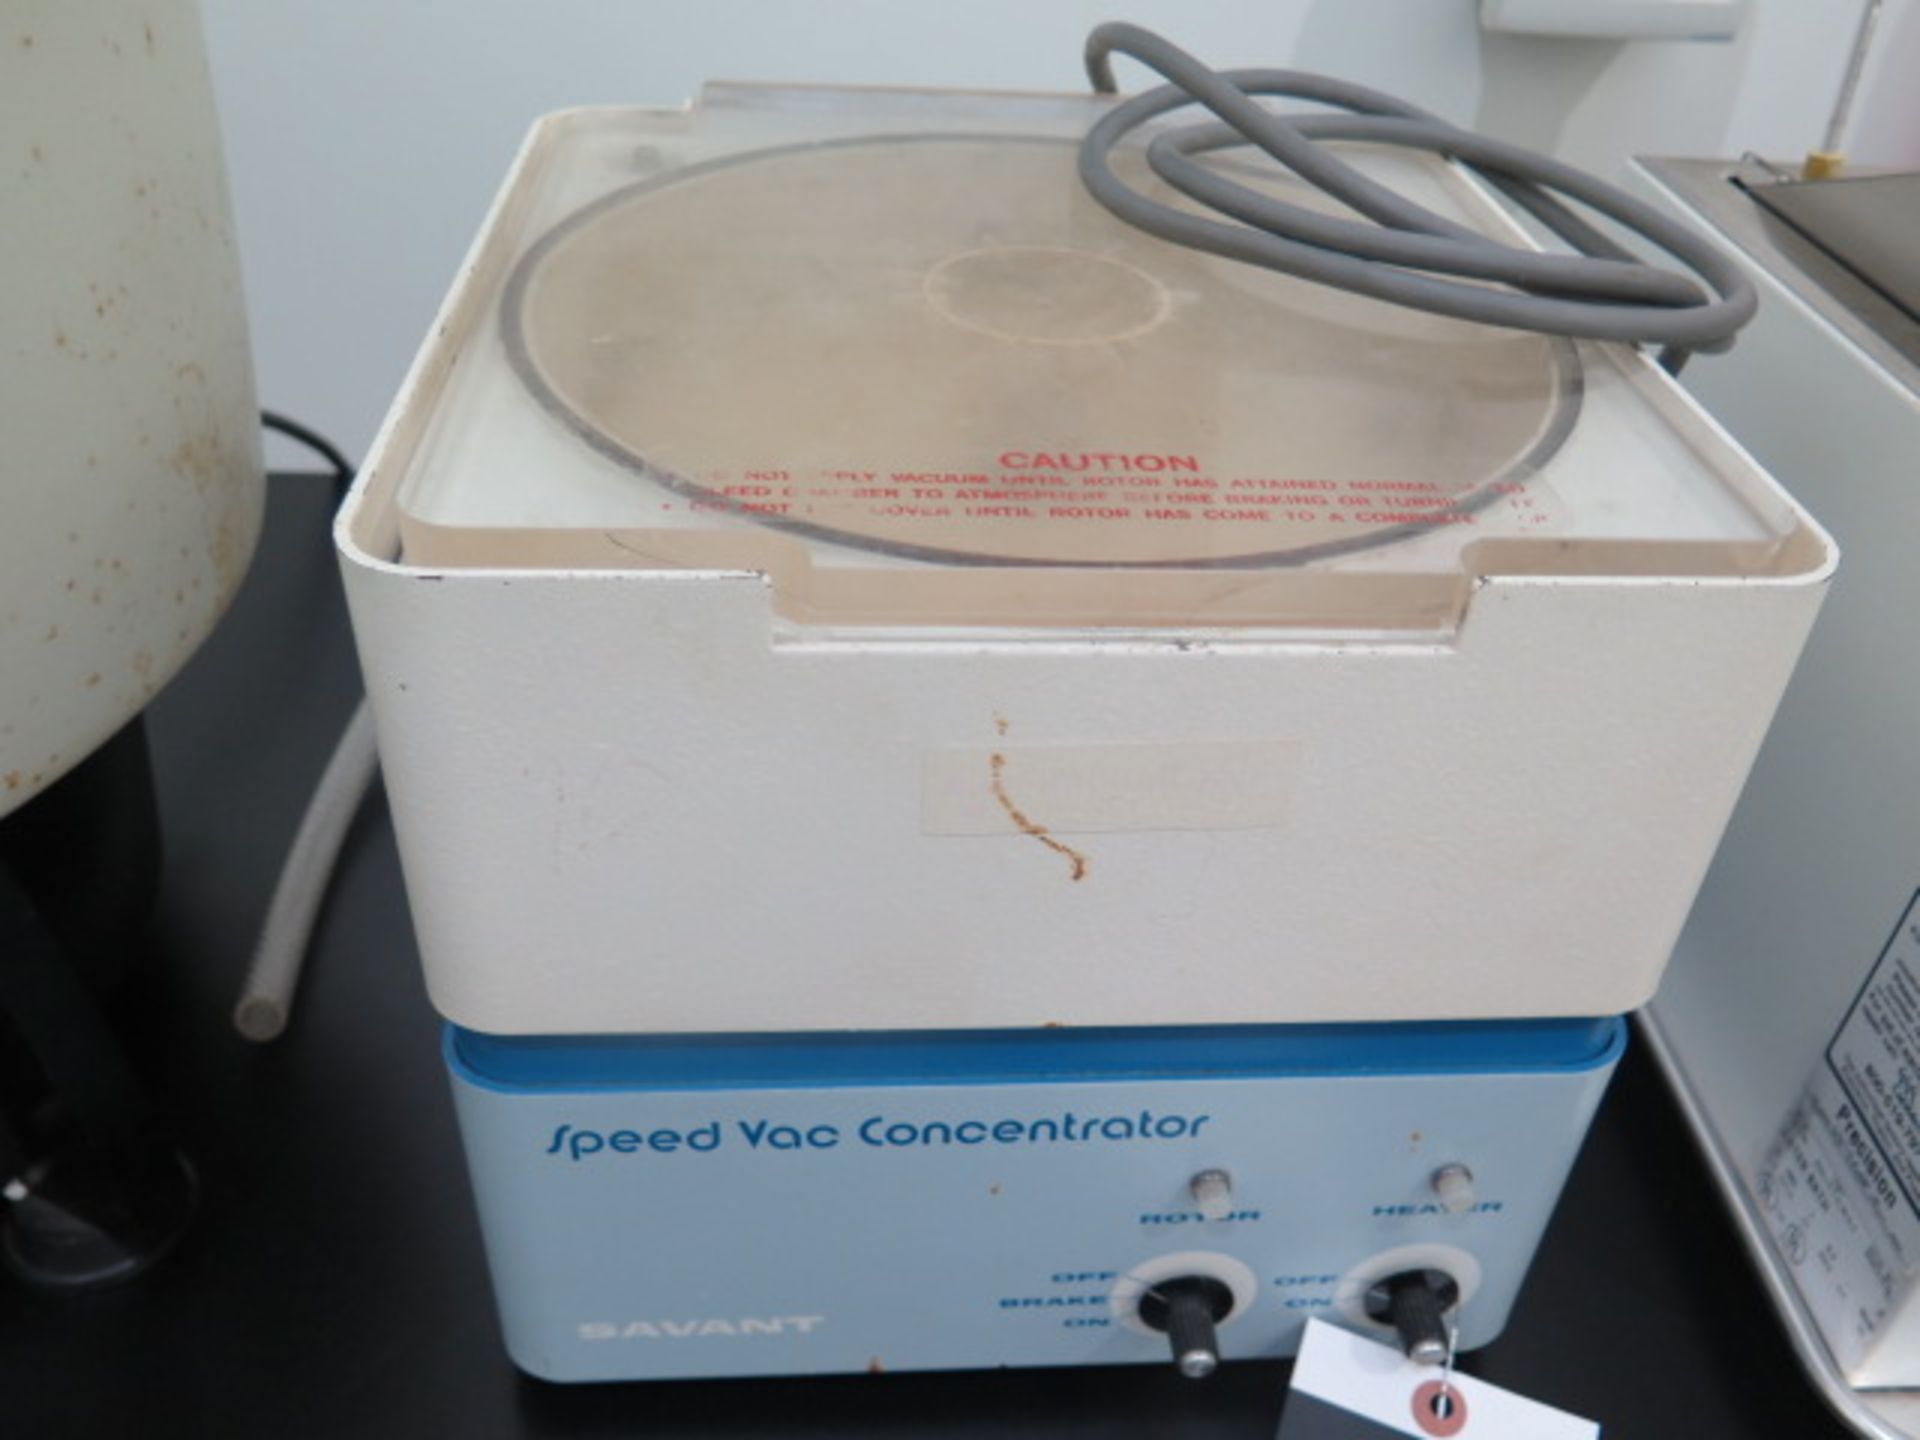 Savant "Speed Vac Concentrator" Vacuum Centrifuge (SOLD AS-IS - NO WARRANTY) - Image 2 of 6